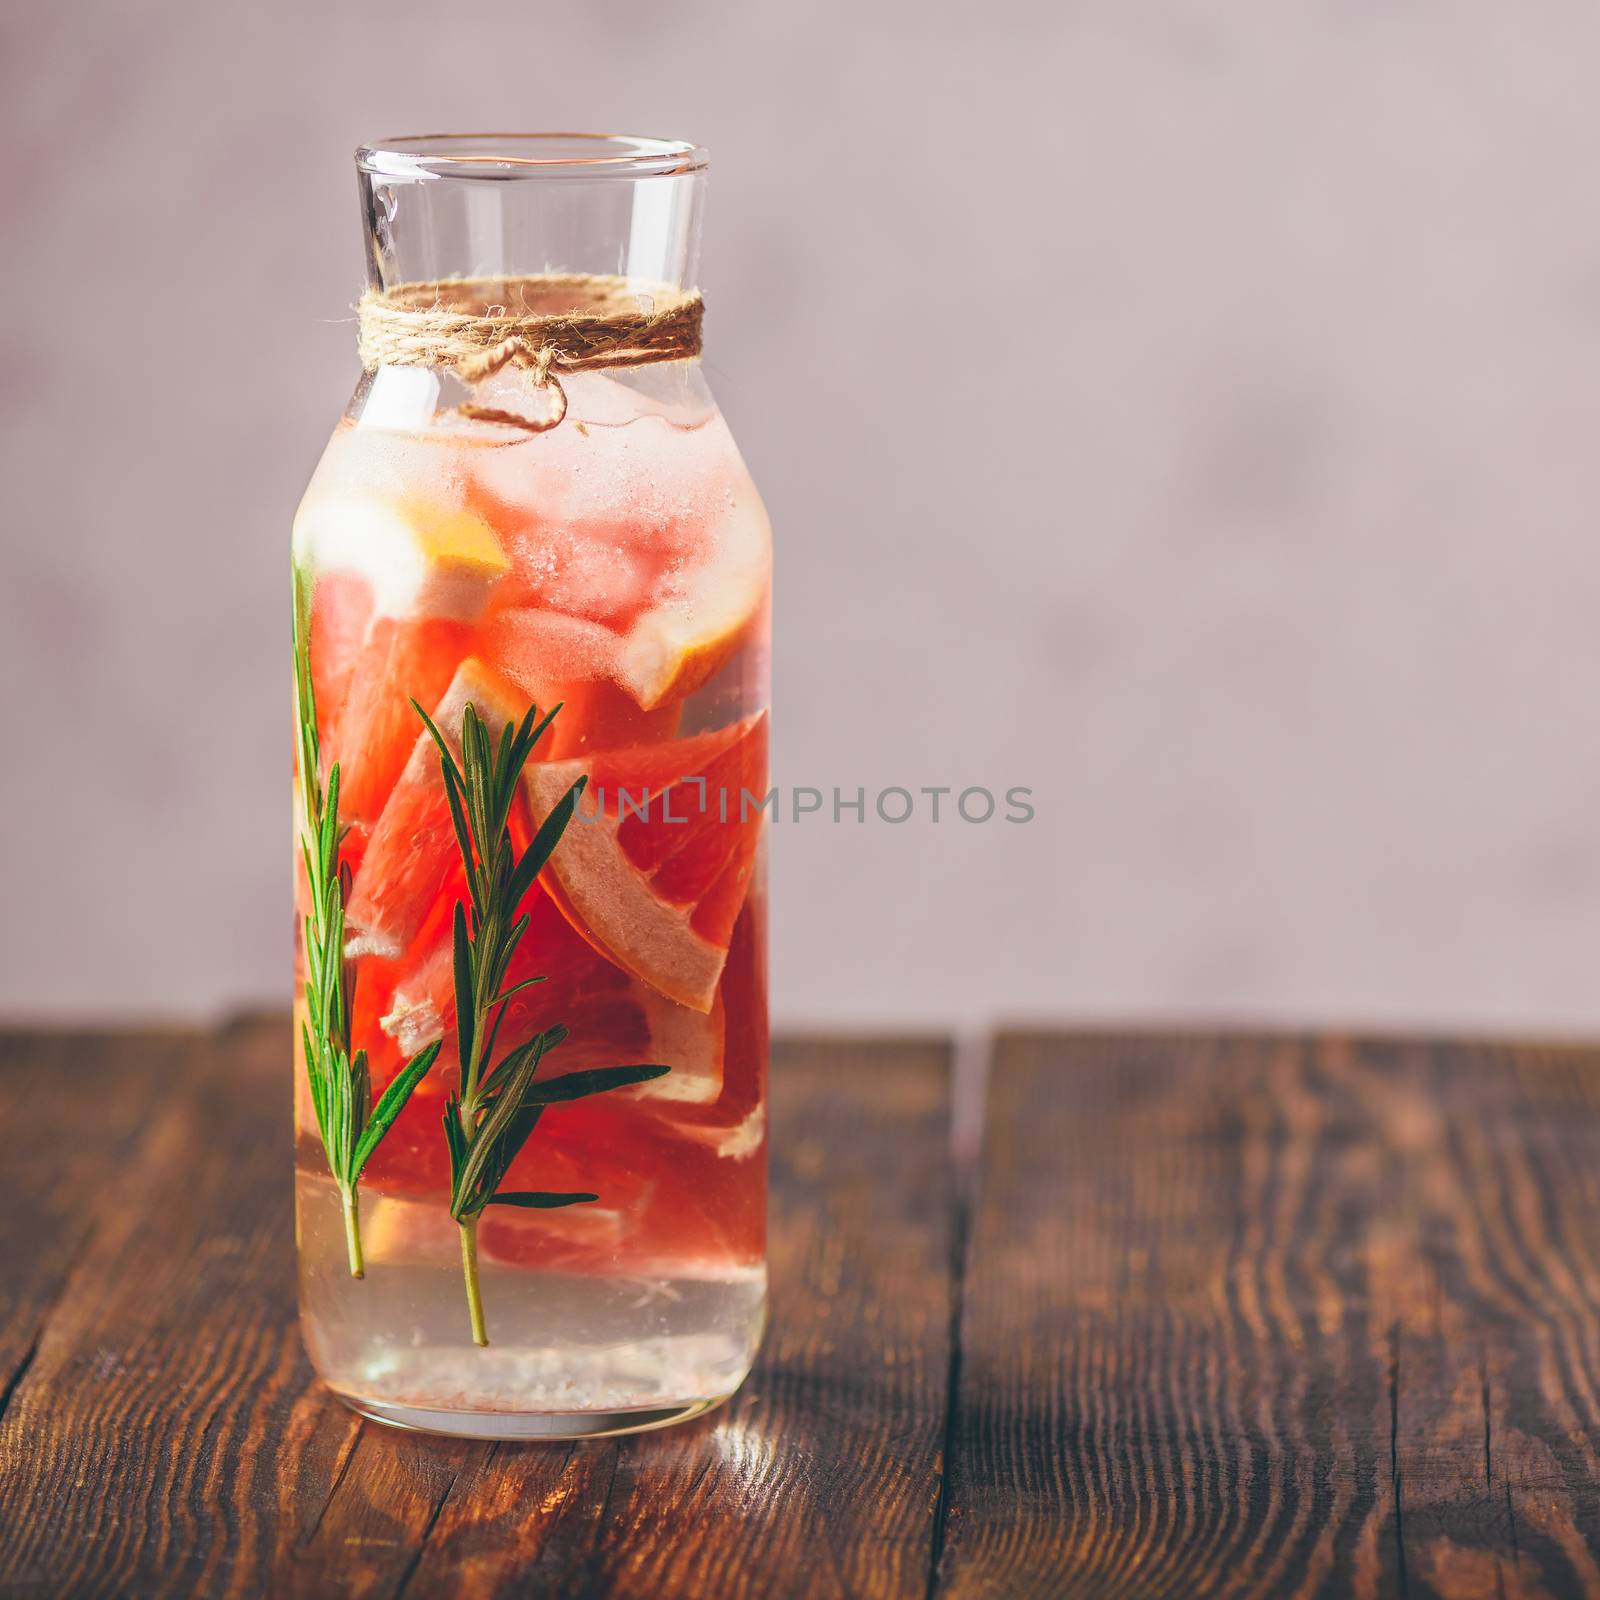 Bottle of Detox Water Infused with Sliced Raw Grapefruit and Fresh Springs of Rosemary. Copy Space on the Right Side.